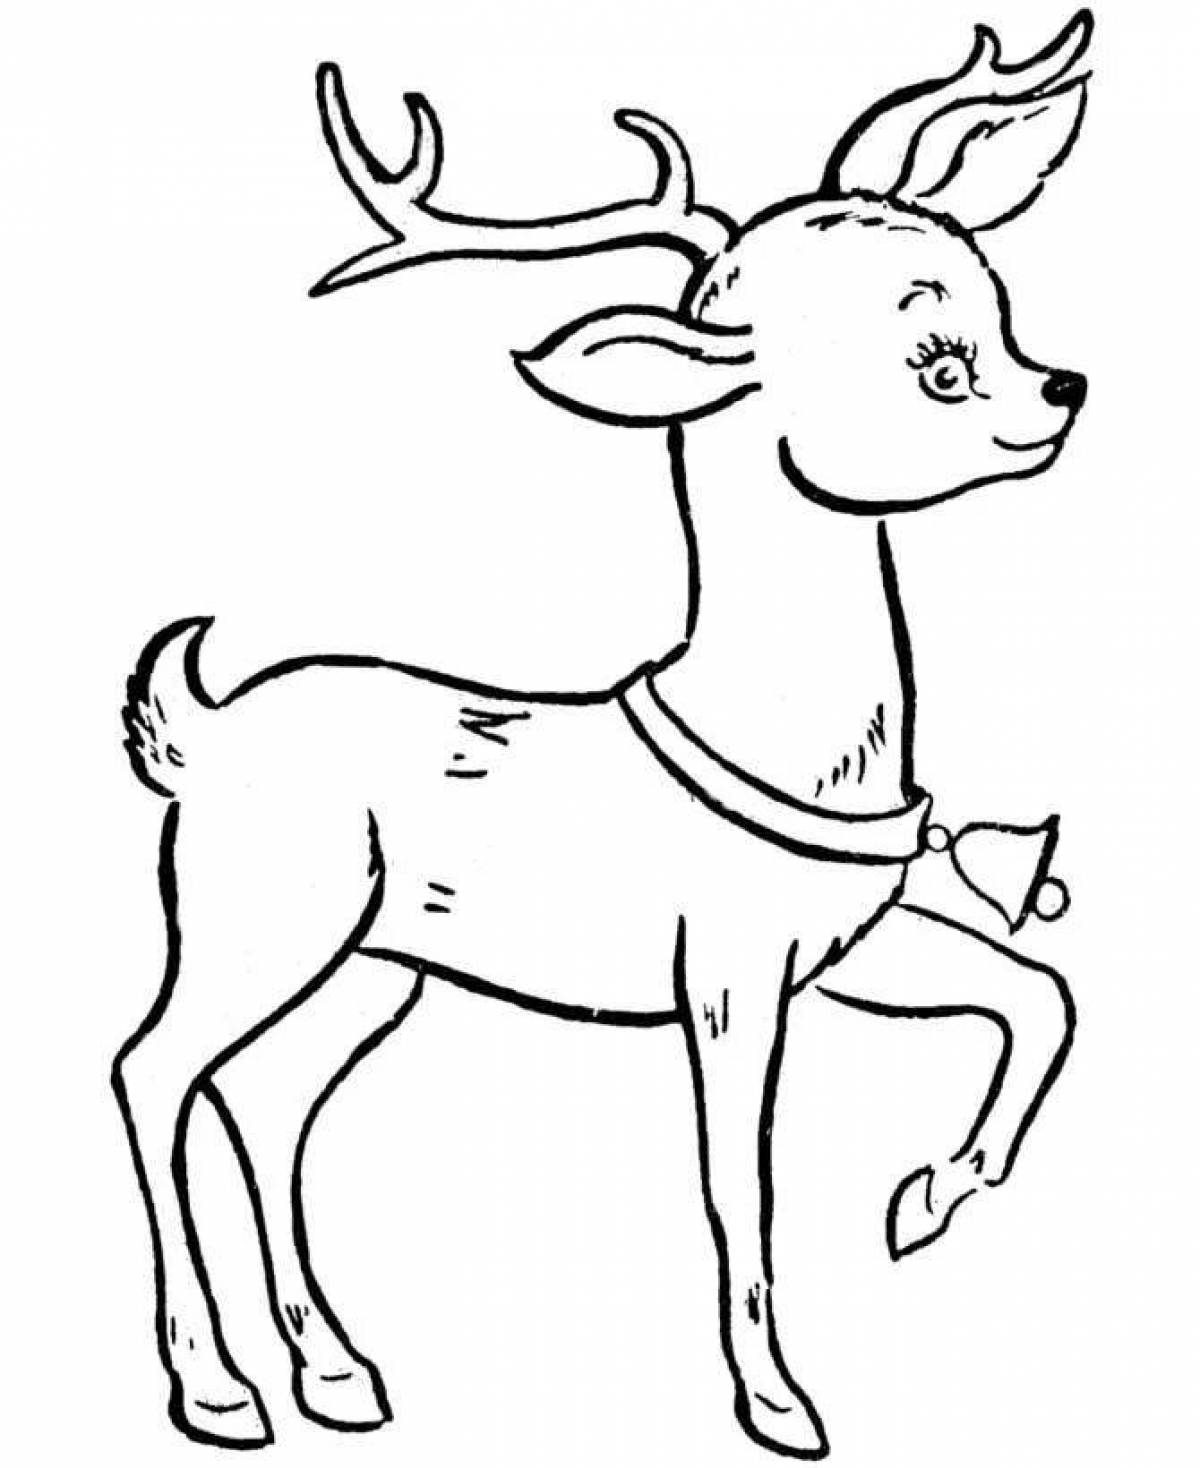 Colorful reindeer coloring page